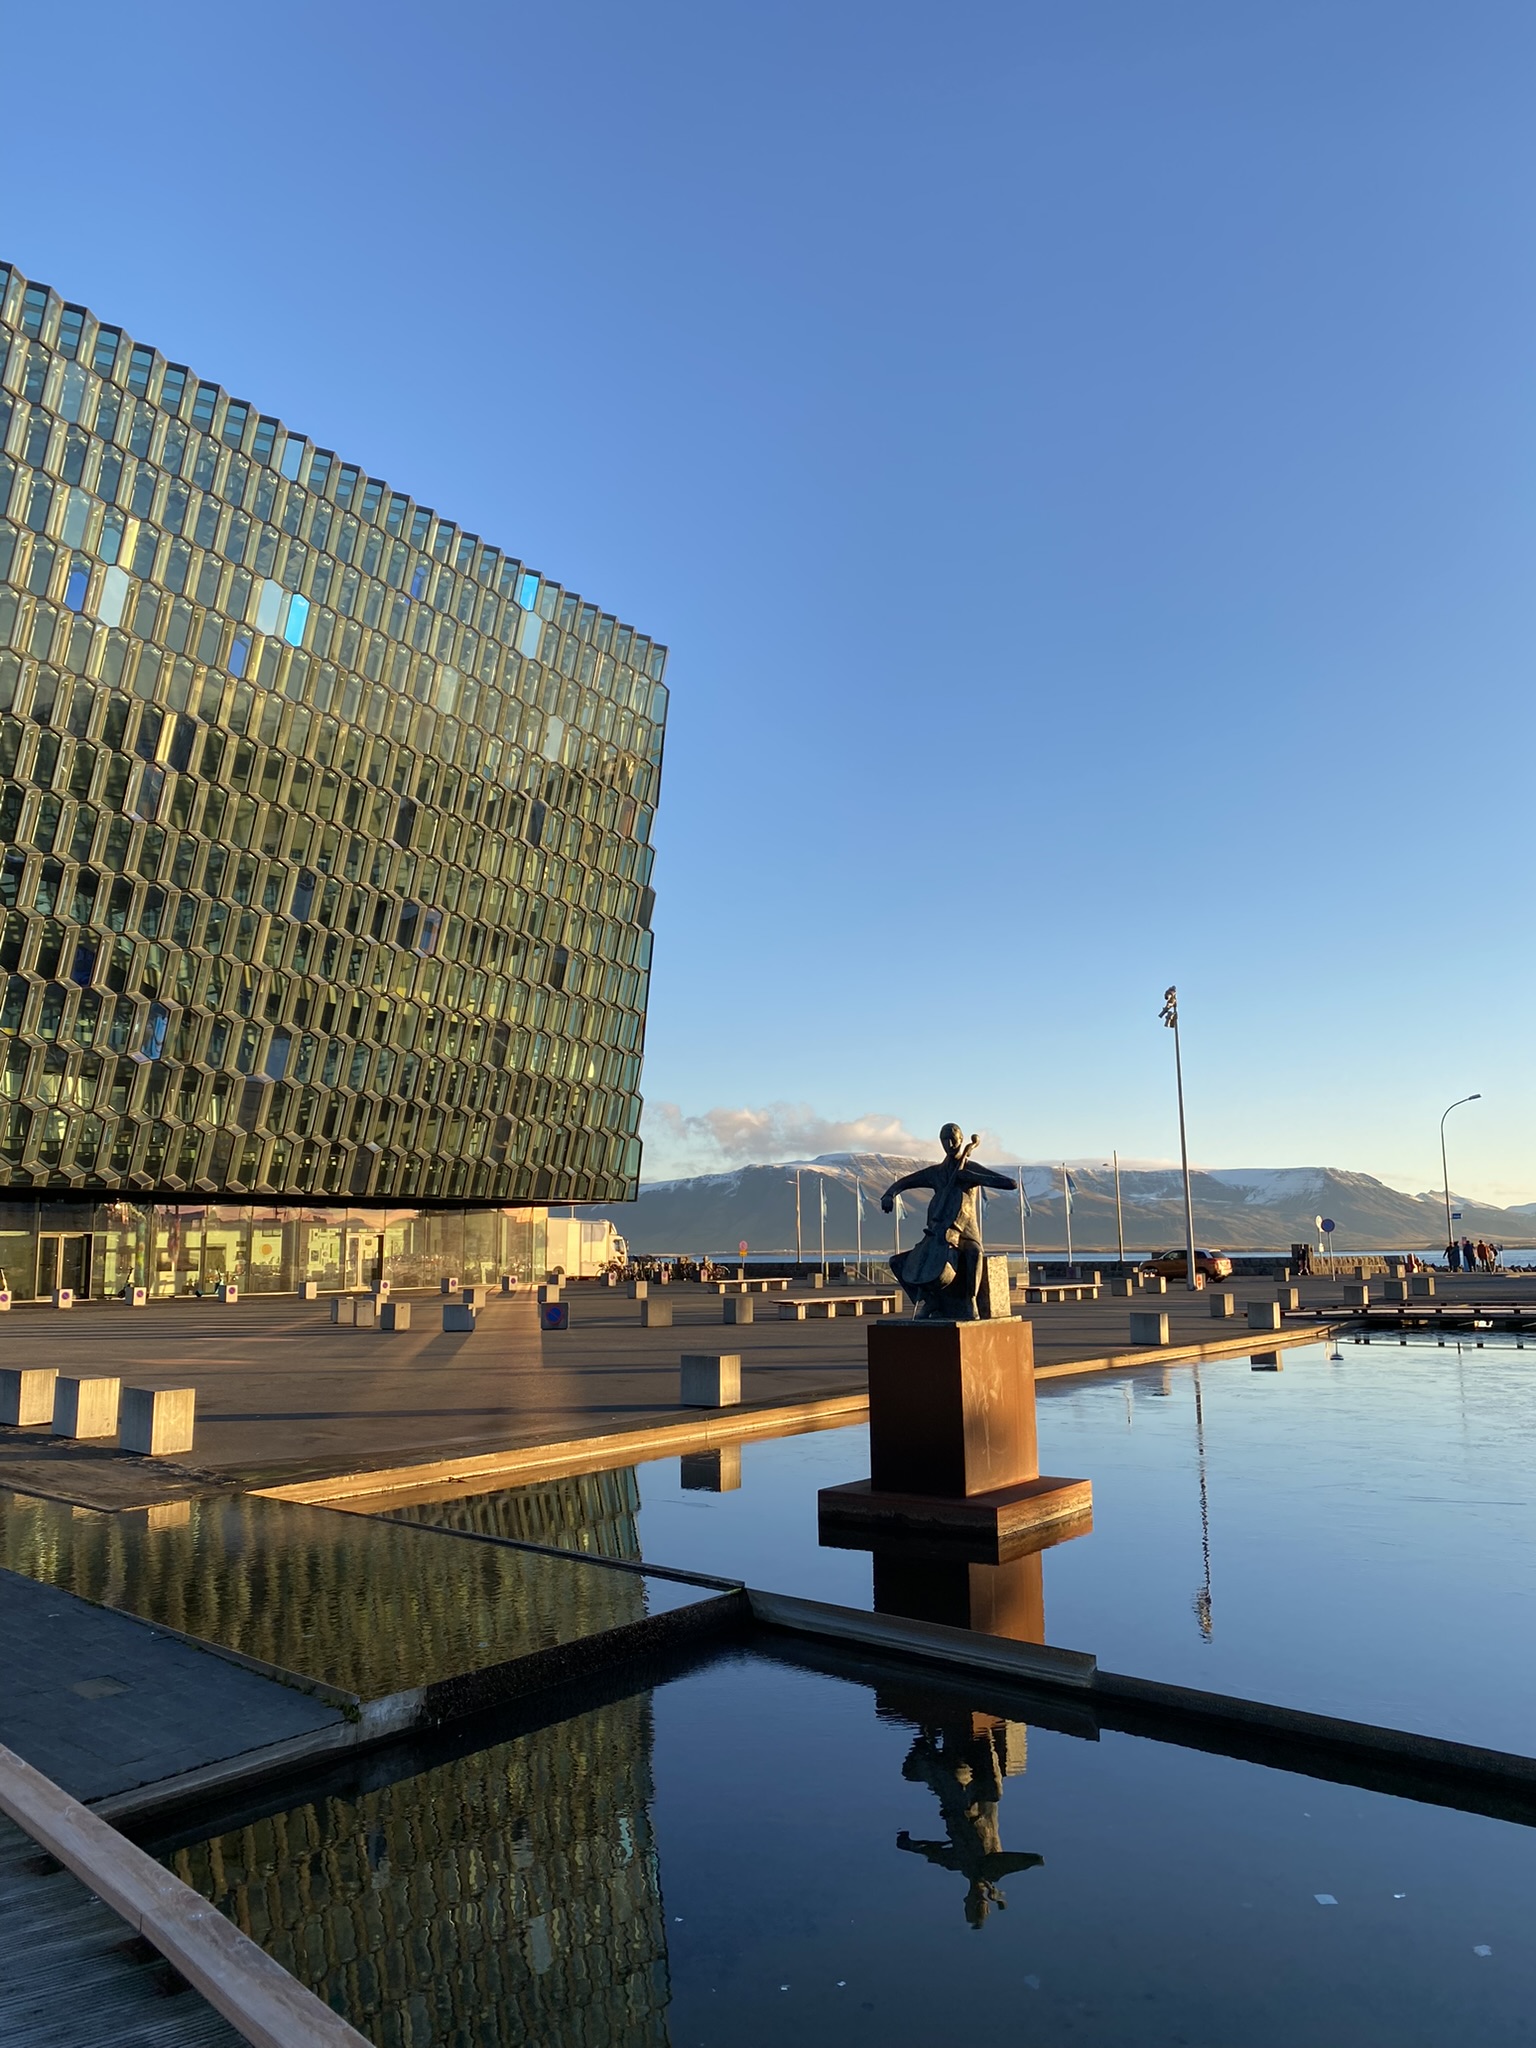 Image of a sunny day in Icelandic city.